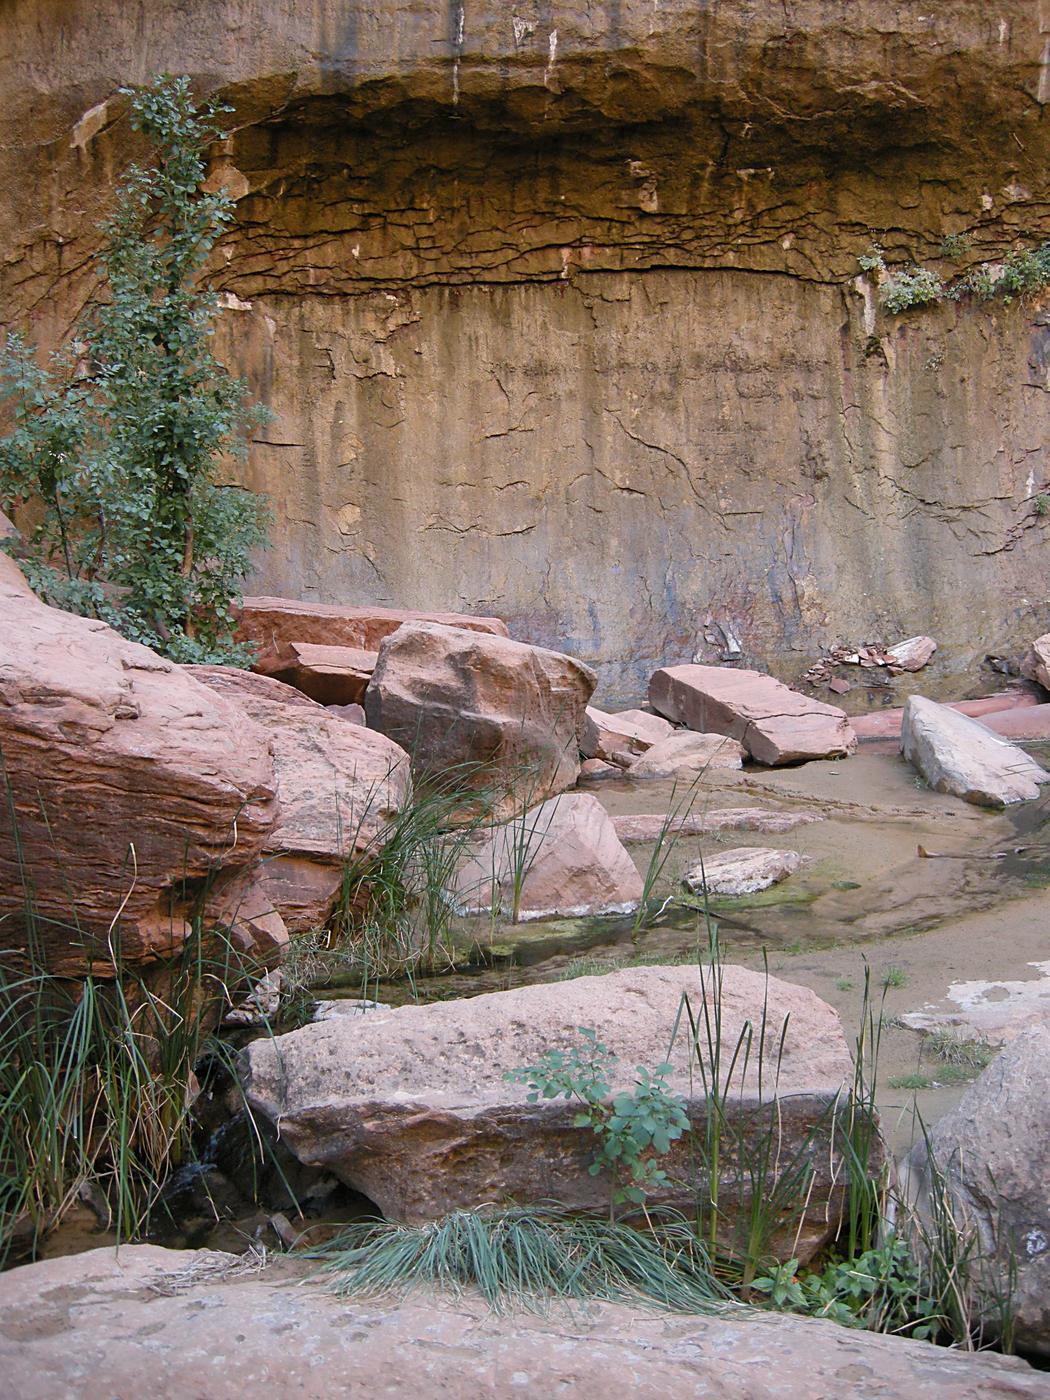 Weeping Wall and Pool, Zion National Park